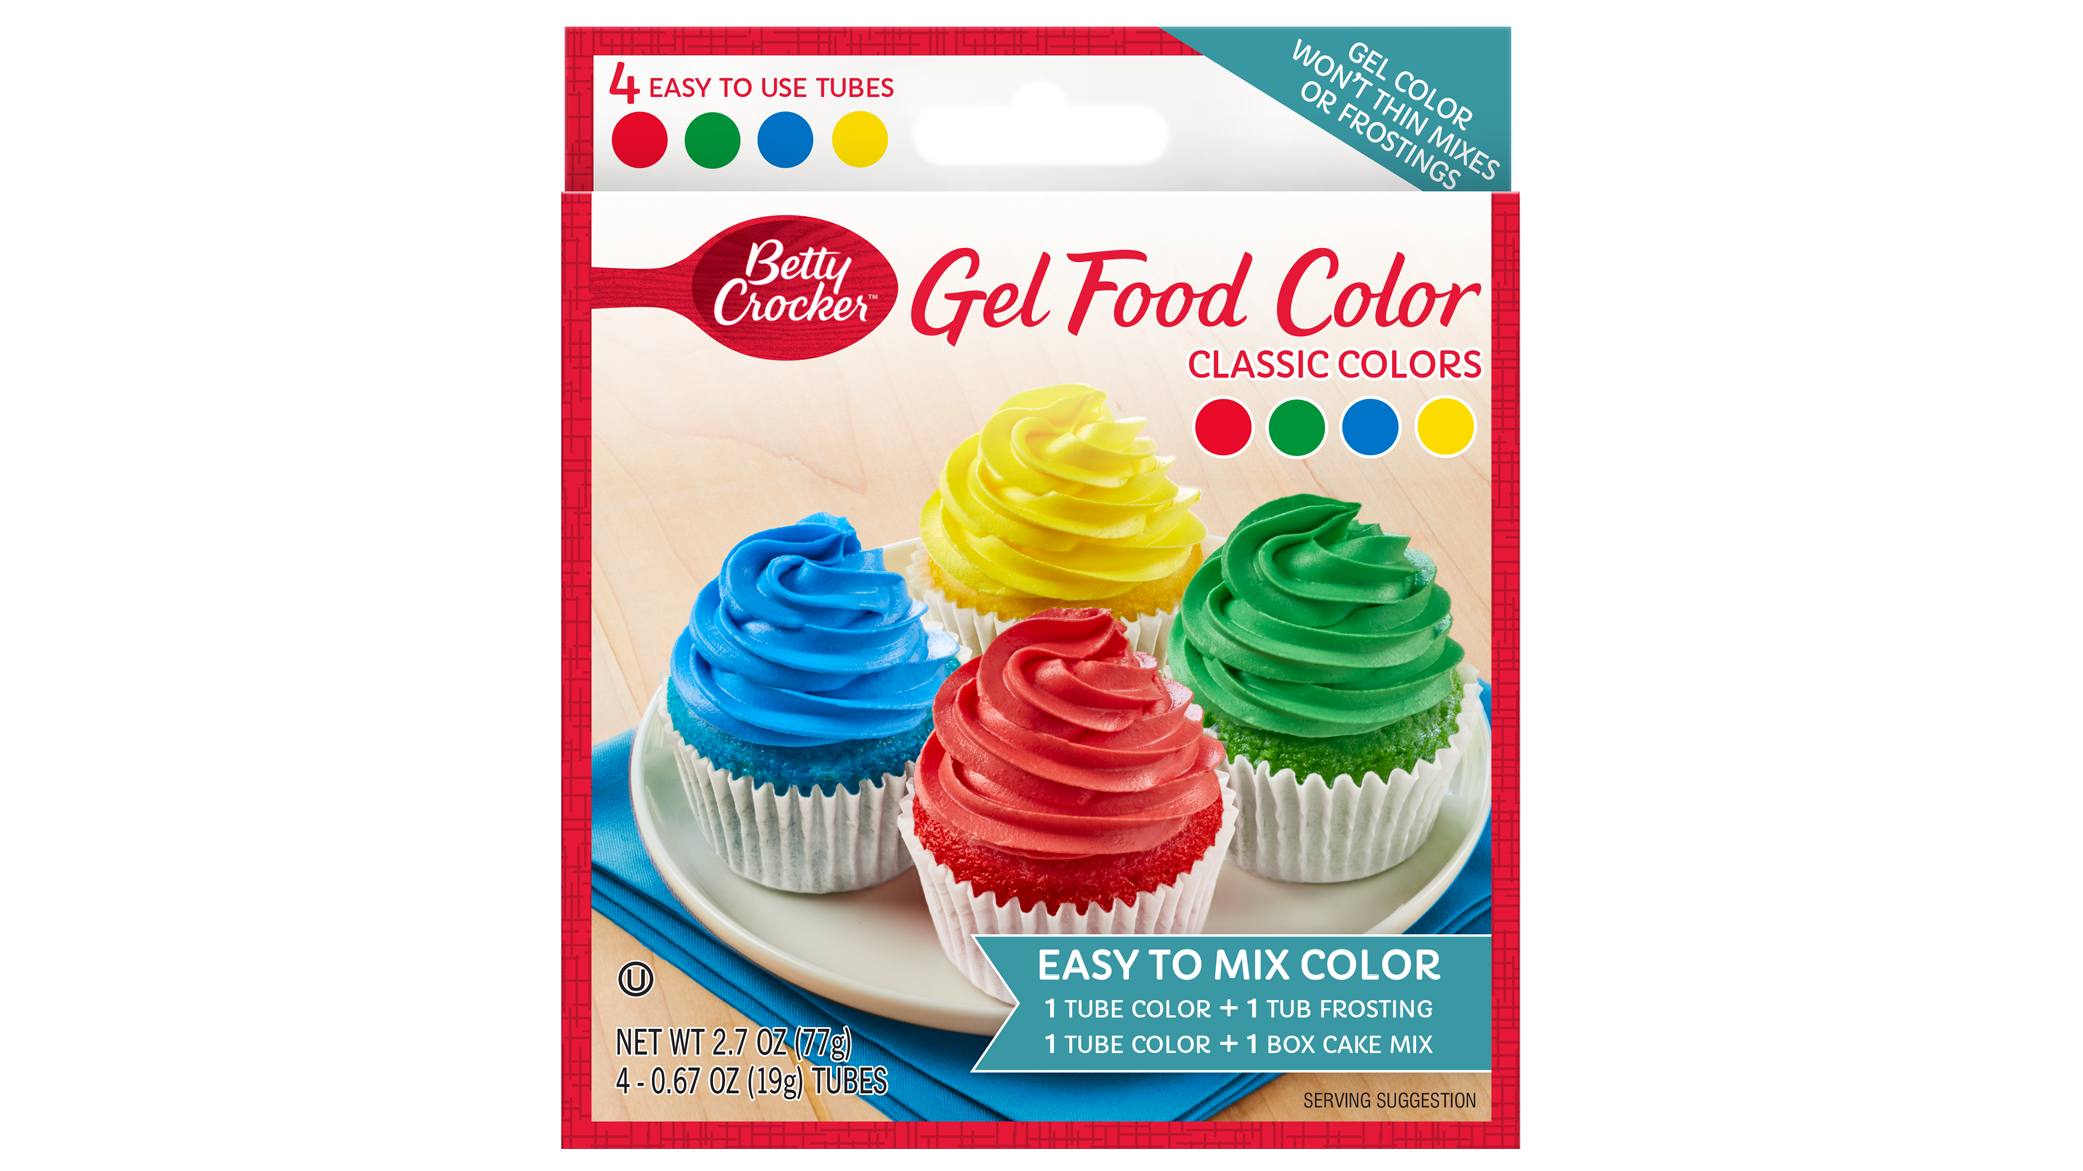 Betty Crocker Decorating Gel Food Color in Classic Colors, 2.7 oz. - image 1 of 3